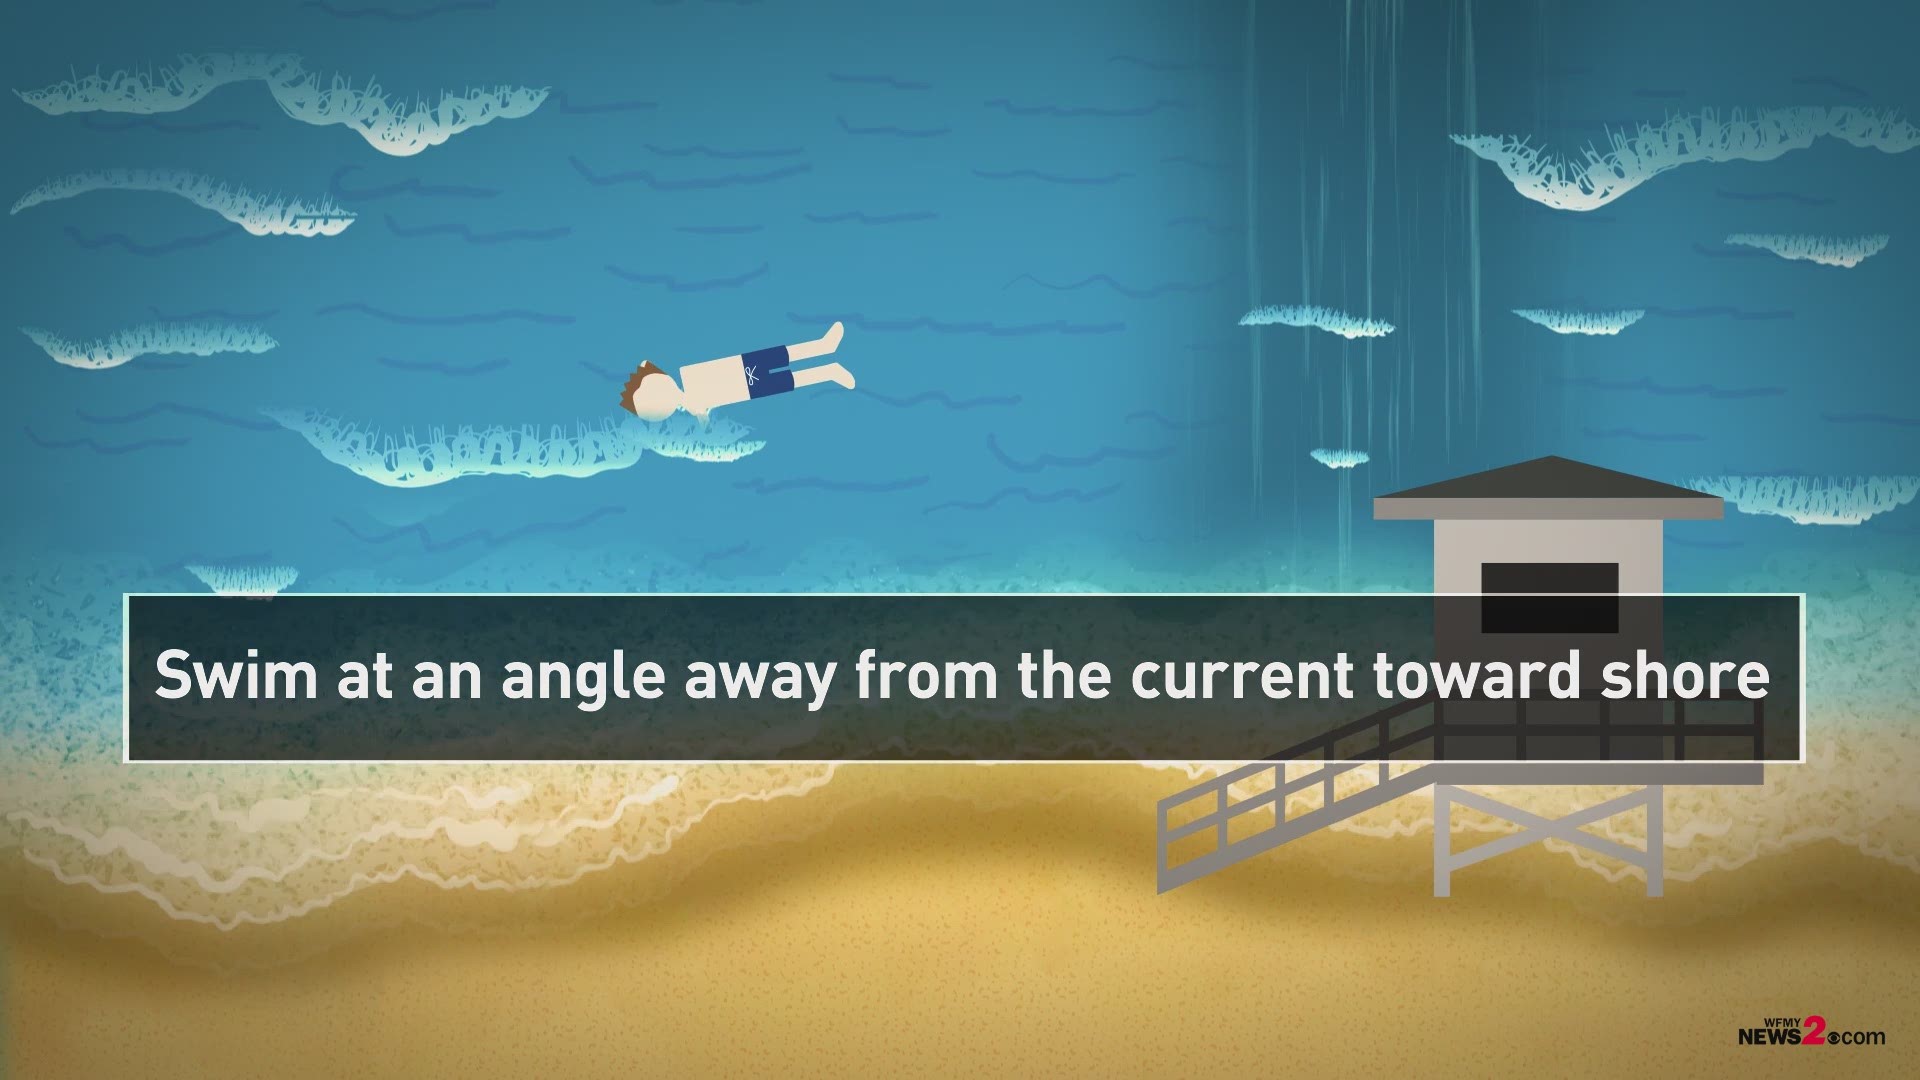 Knowing this could help save your life during a rip current. Find out how rip currents form and how to keep safe.